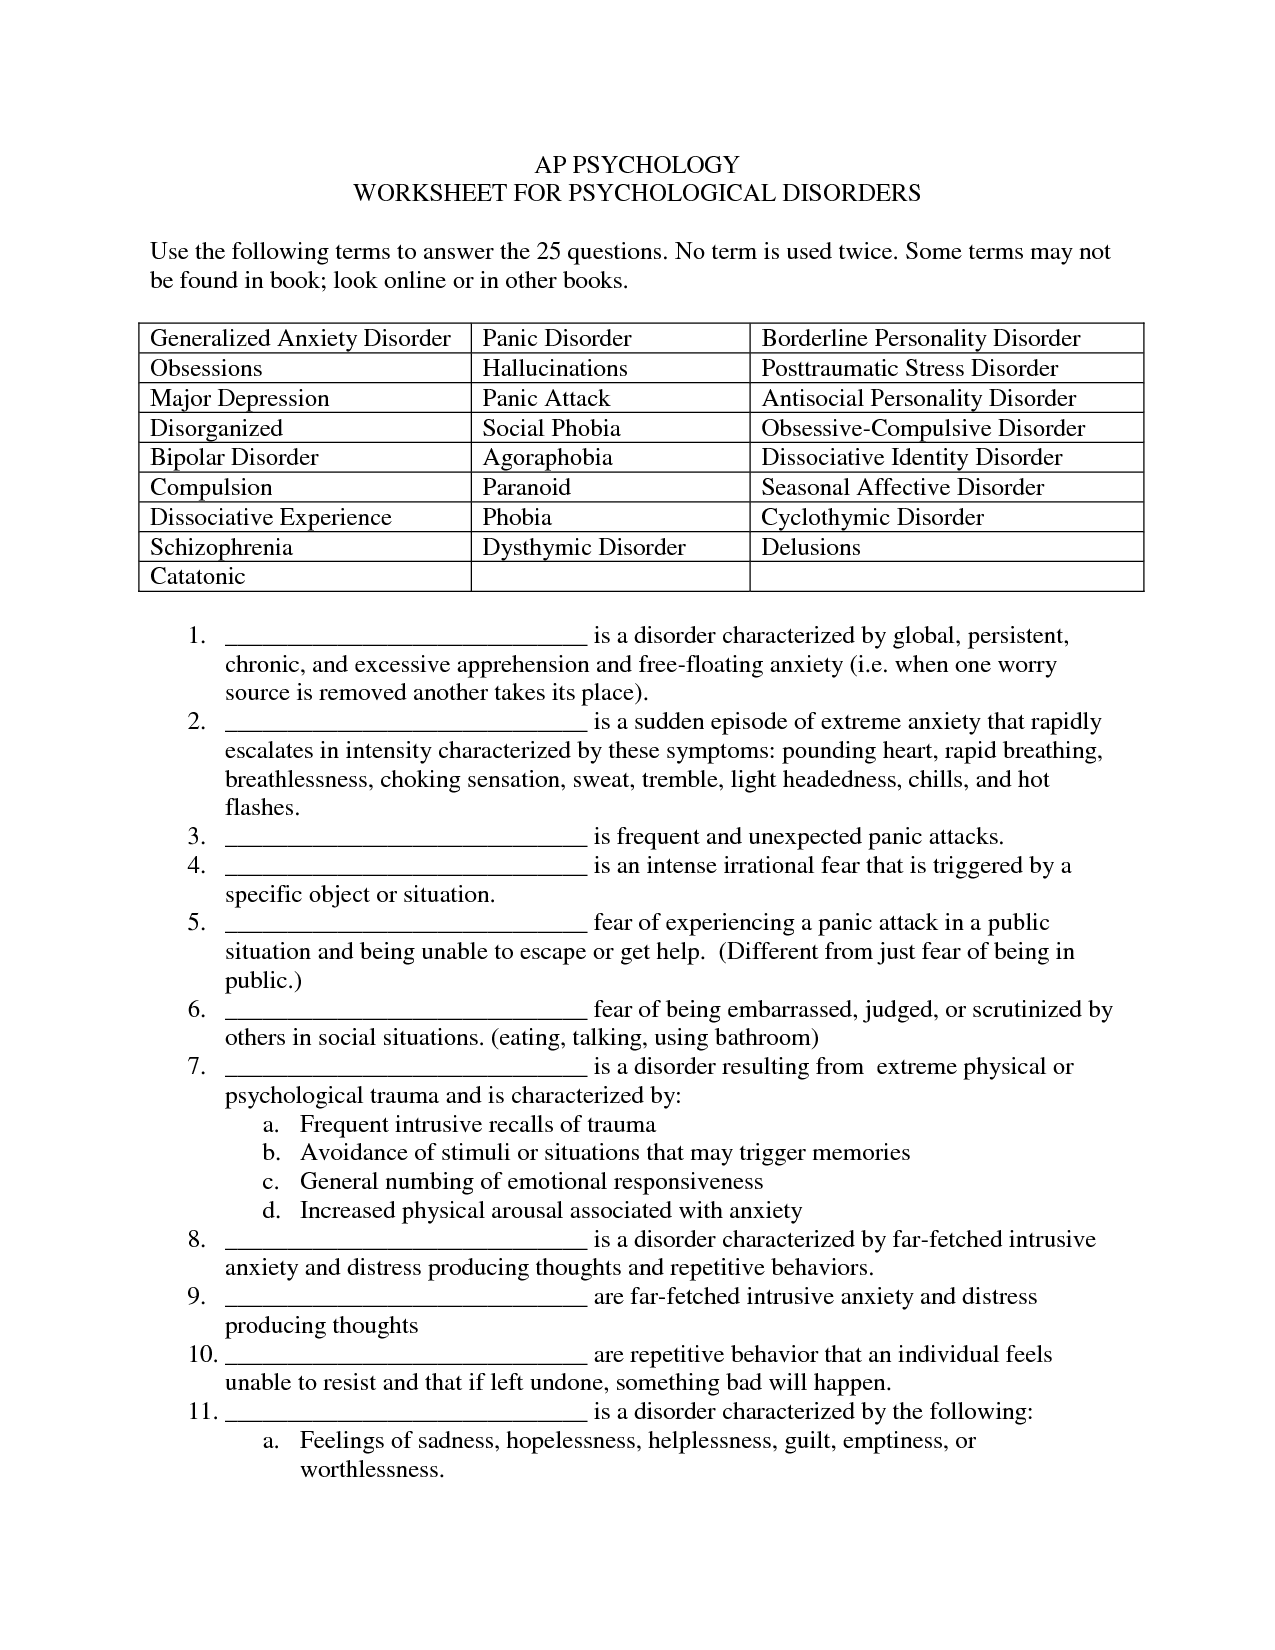 Free Printable Psychology Worksheets That are Bewitching | Ruby Website